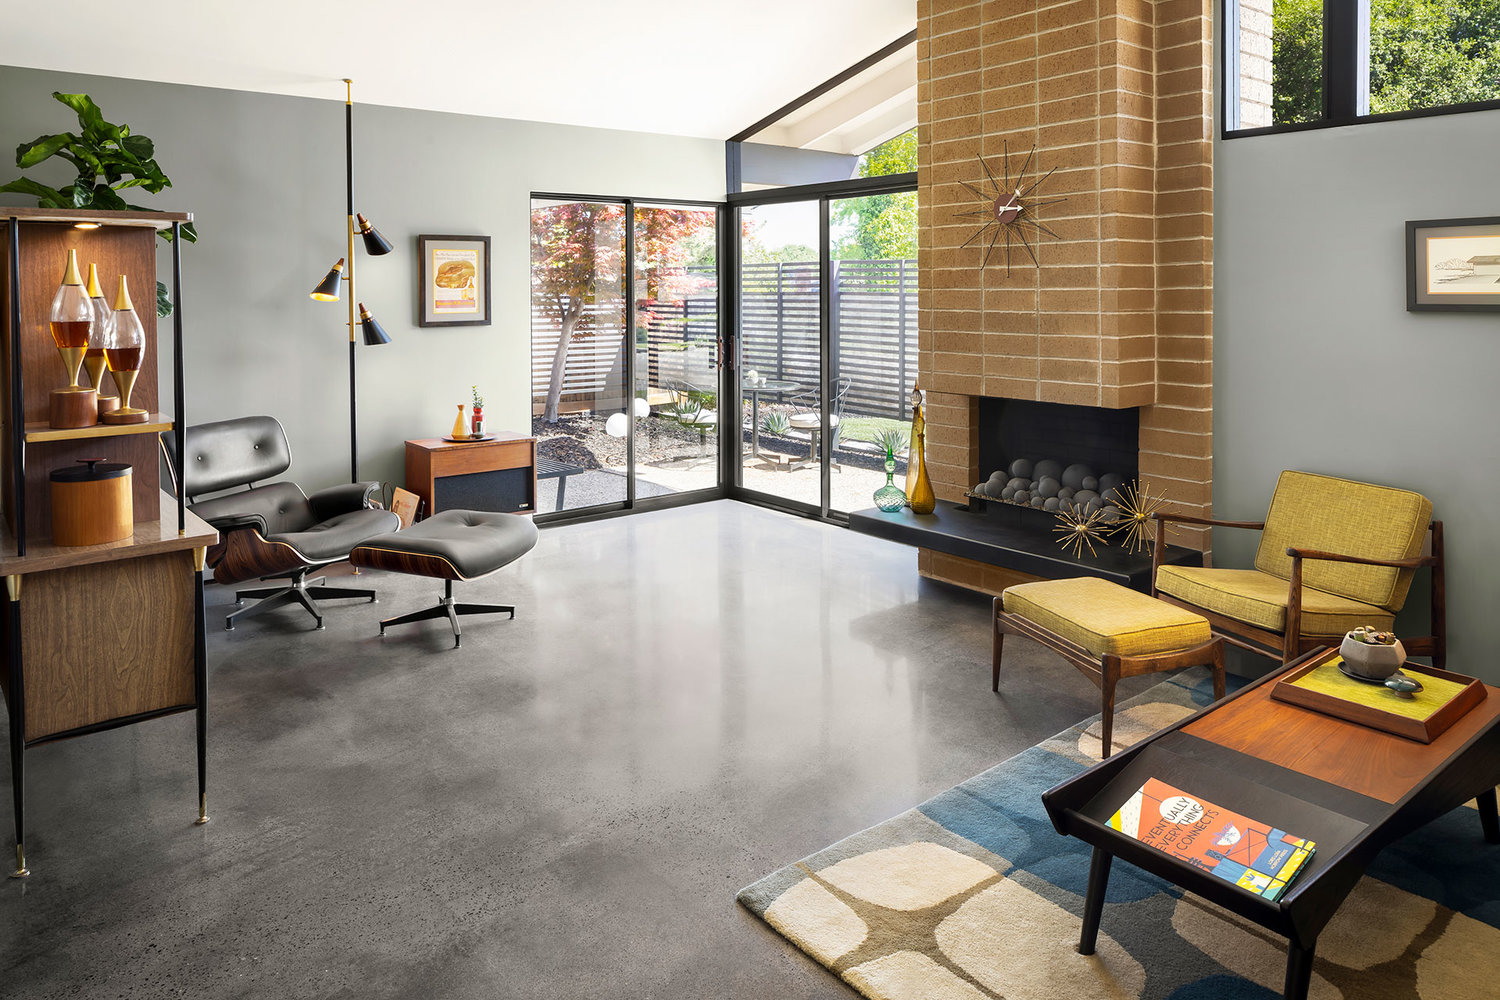 Polished Concrete floors in mid-century home in Orange, Ca